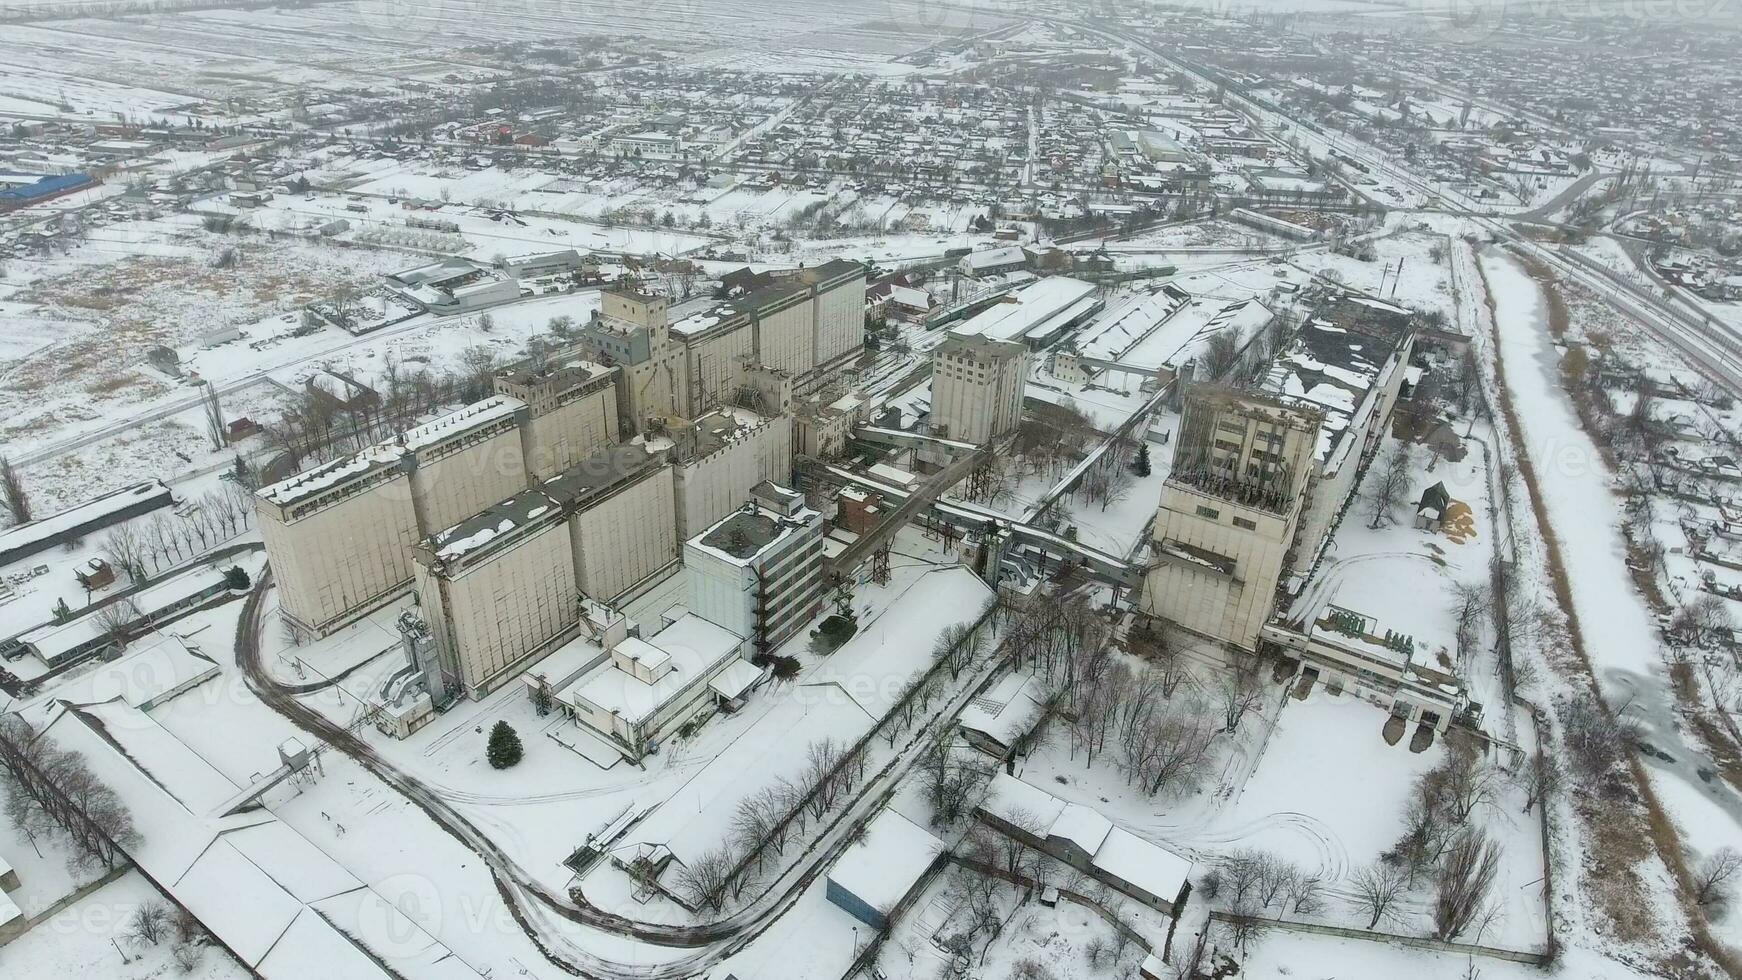 Grain terminal in the winter season. Snow-covered grain elevator in rural areas. A building for drying and storing grain. photo